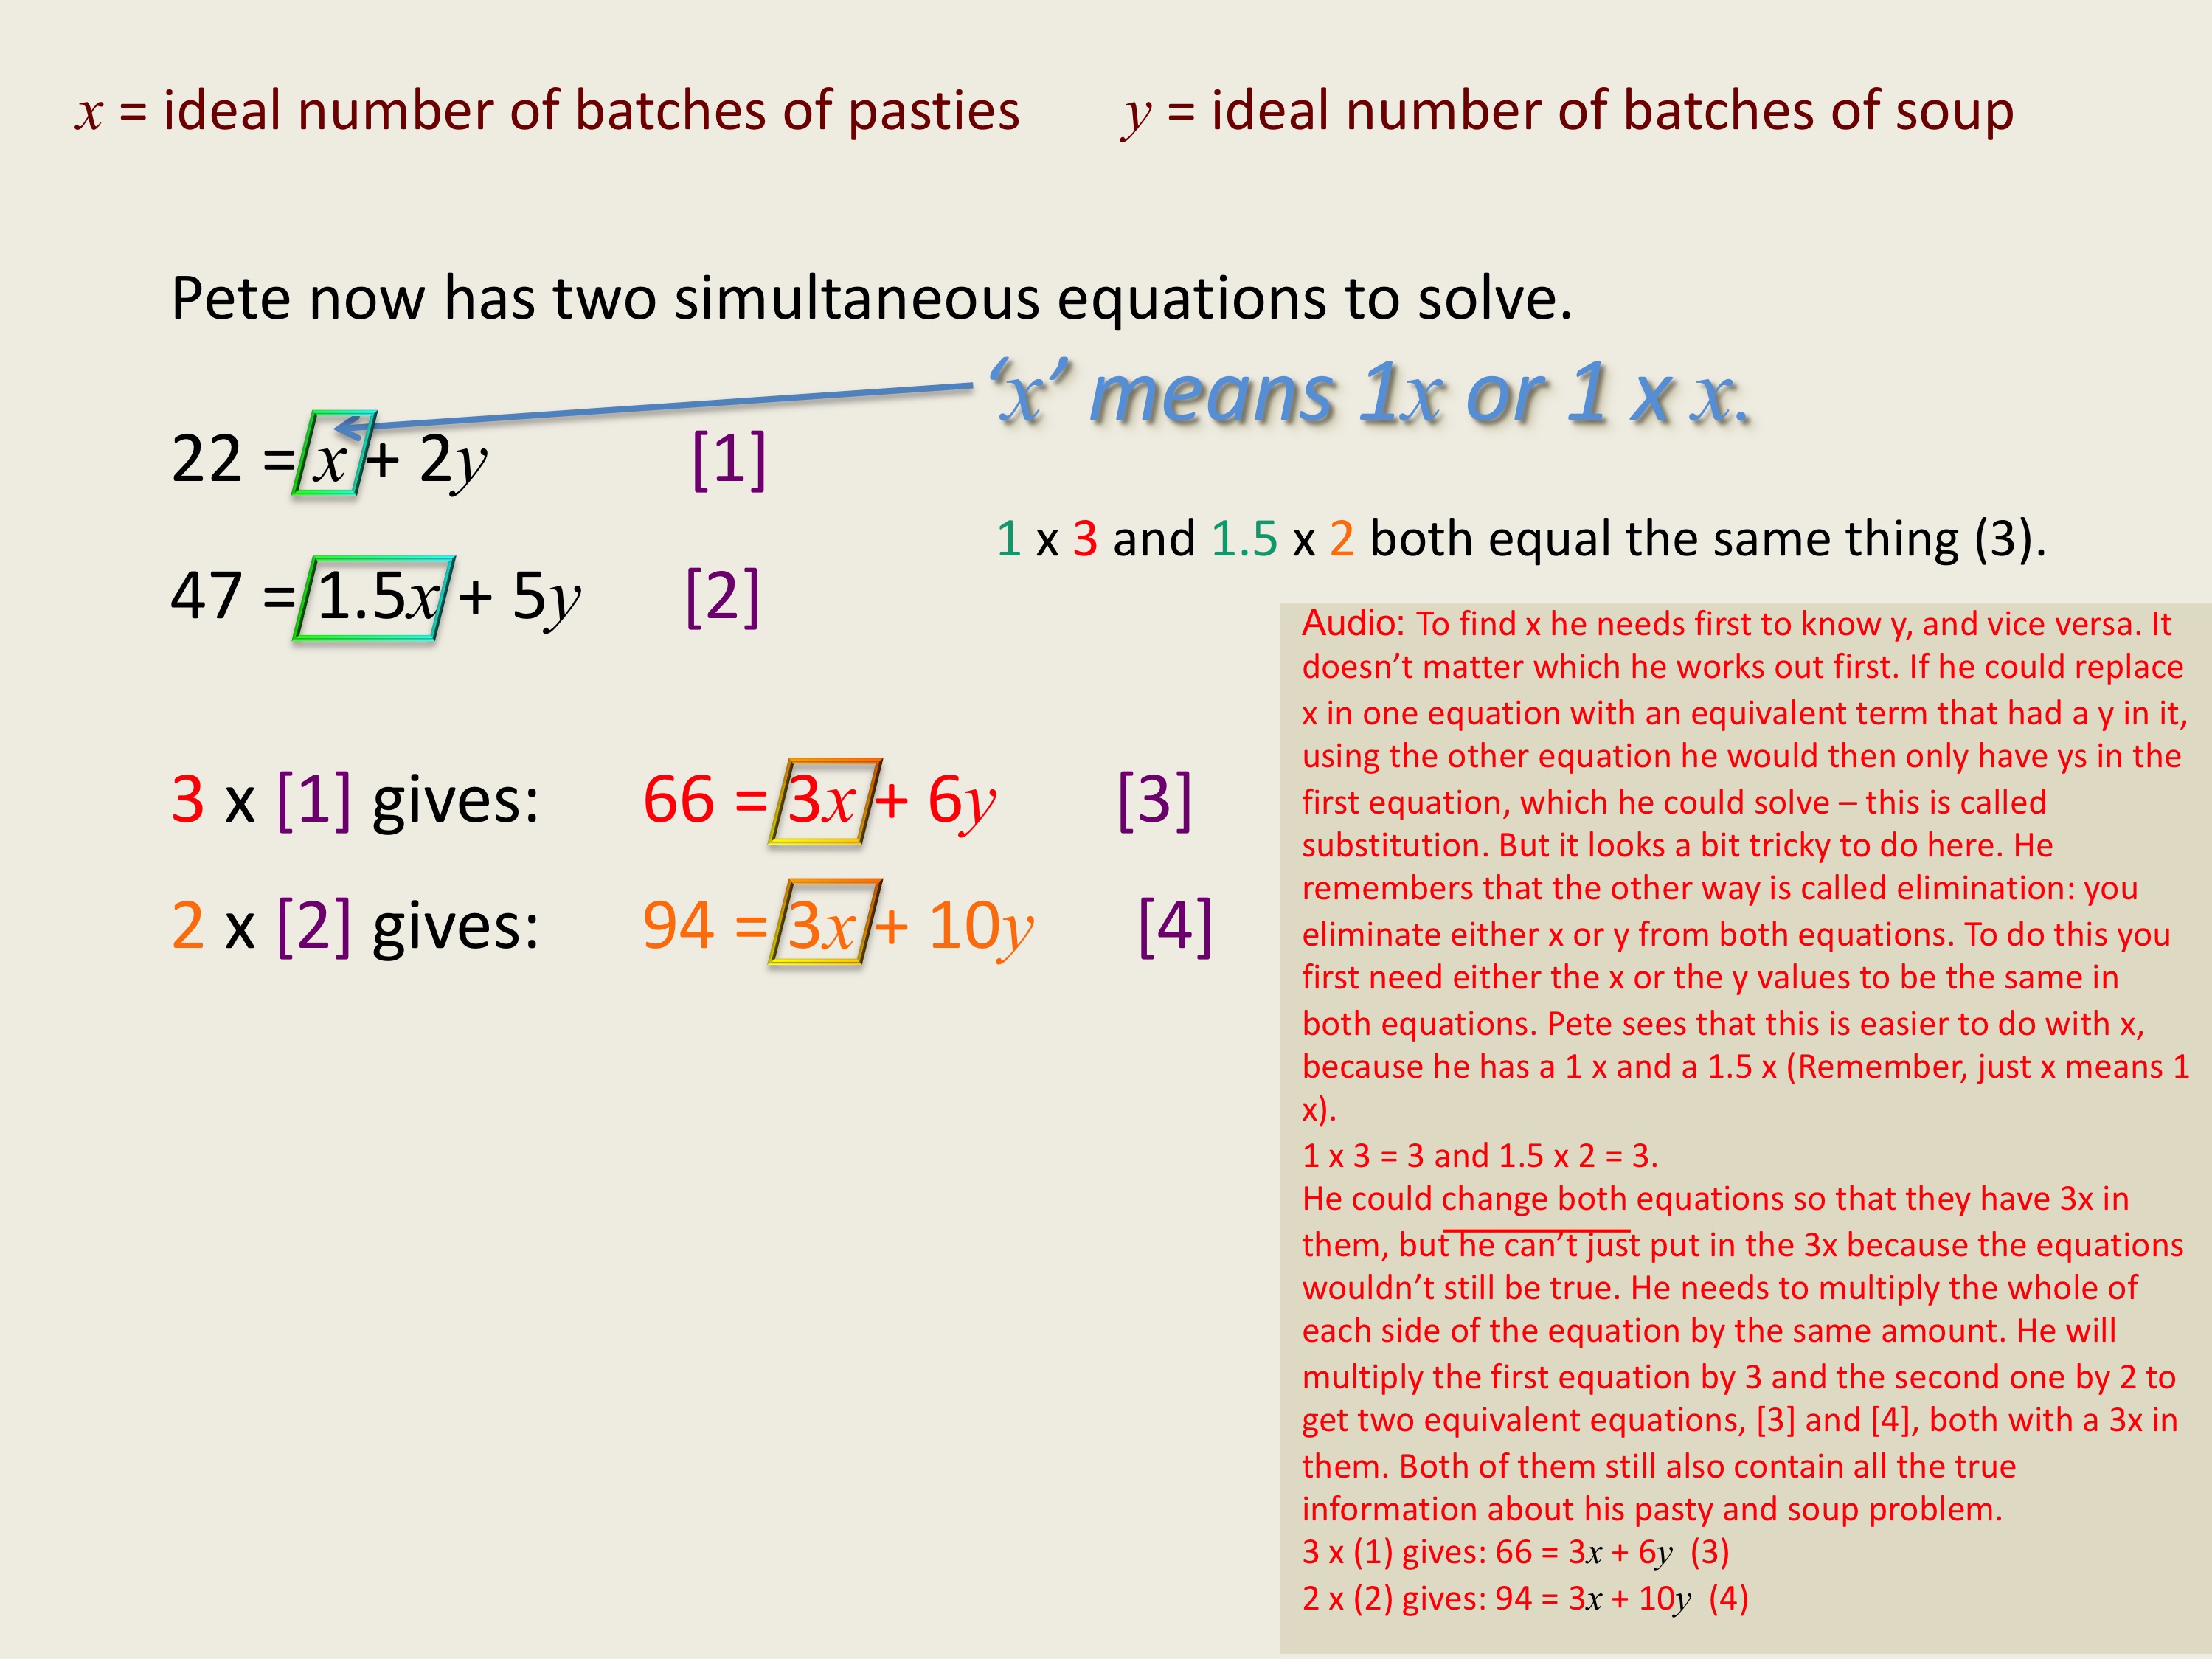 Dynamic PowerPoint slide on simultaneous equations